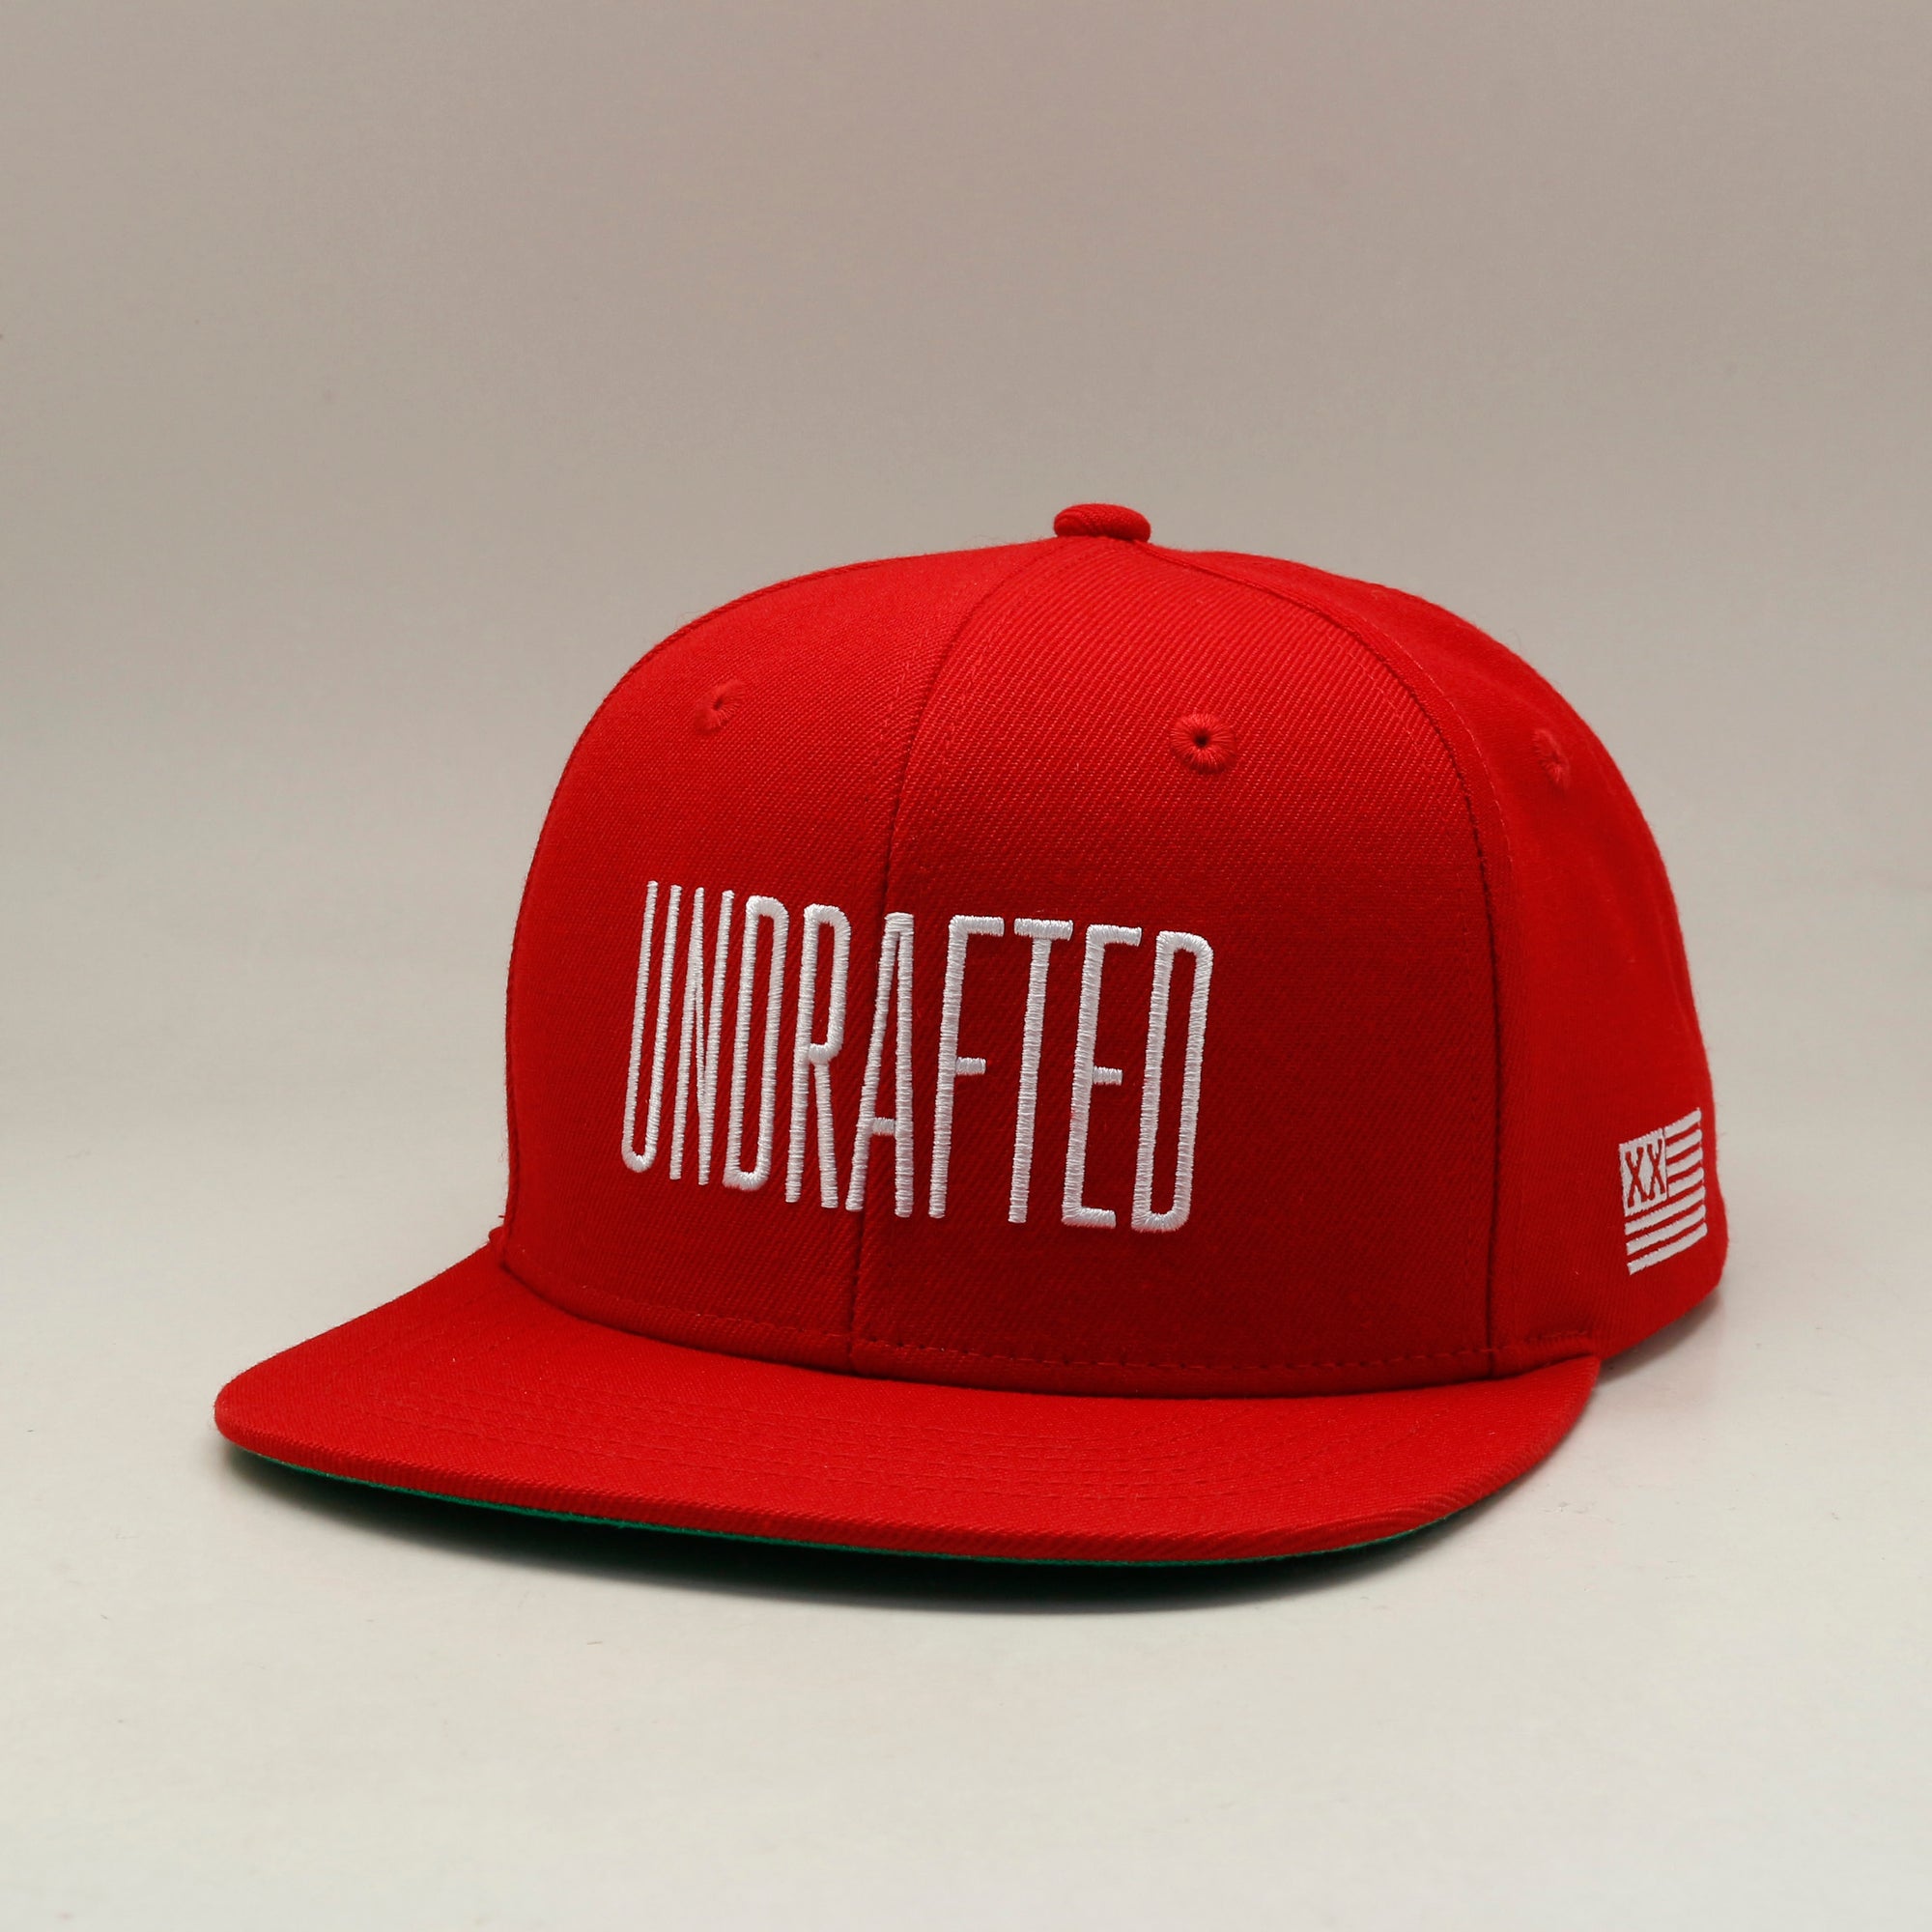 Undrafted Snapback - Red/White